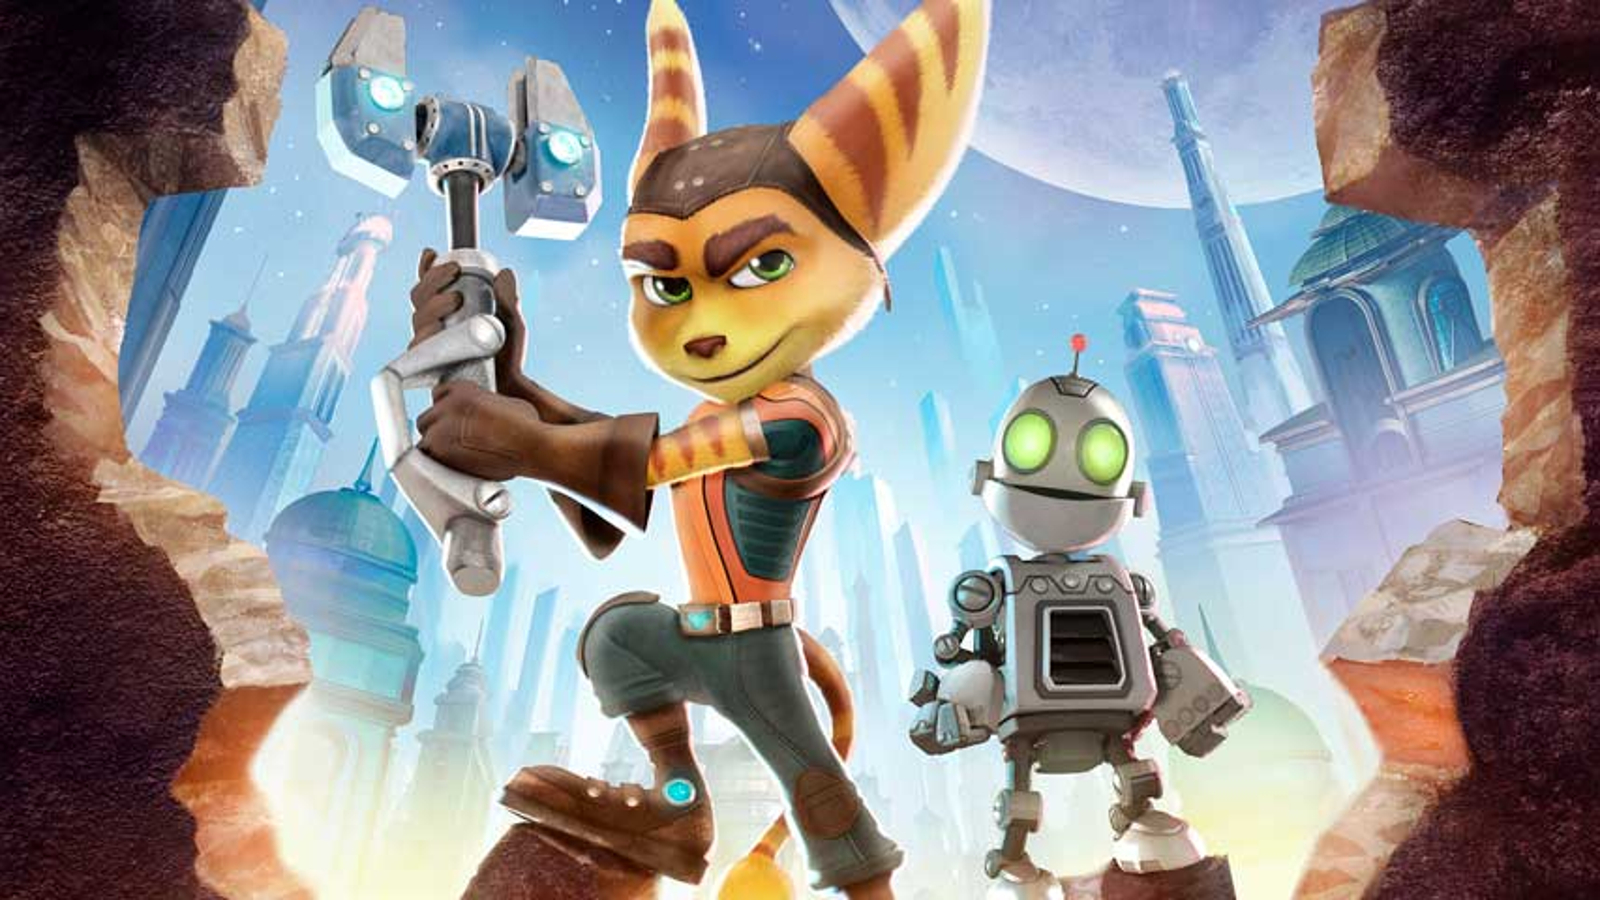 Ratchet & Clank PS4 game and movie both pushed back to 2016